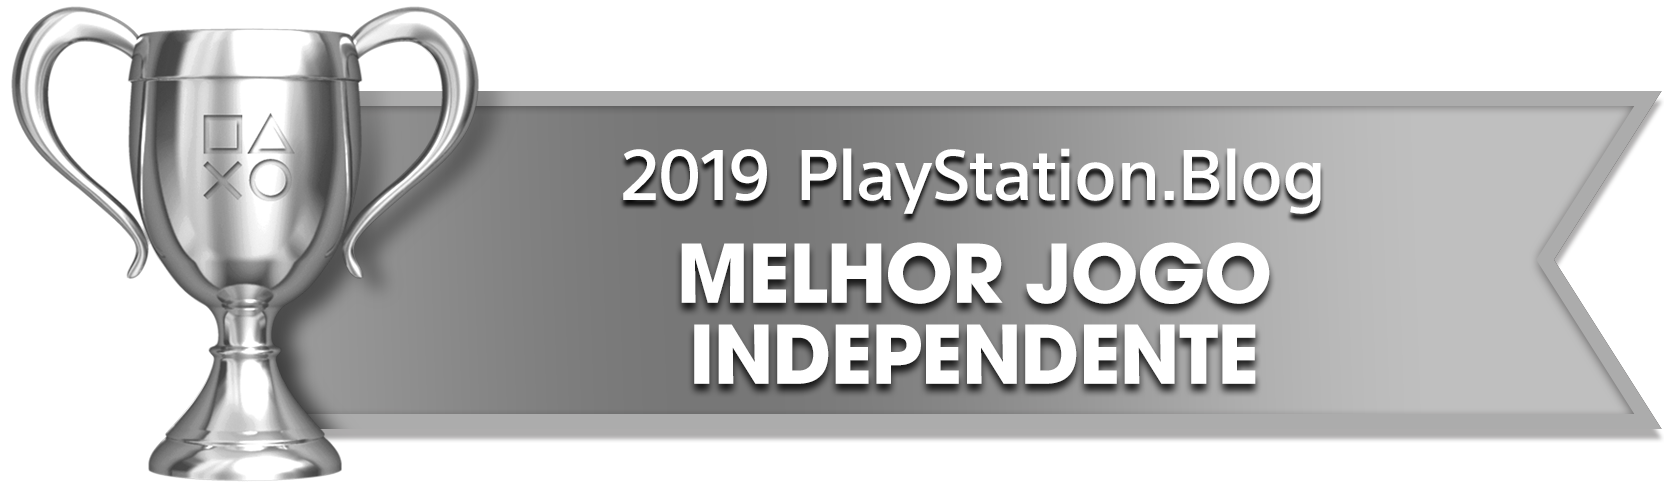 PS Blog Game of the Year 2019 - Best Independent Game - 3 - Silver